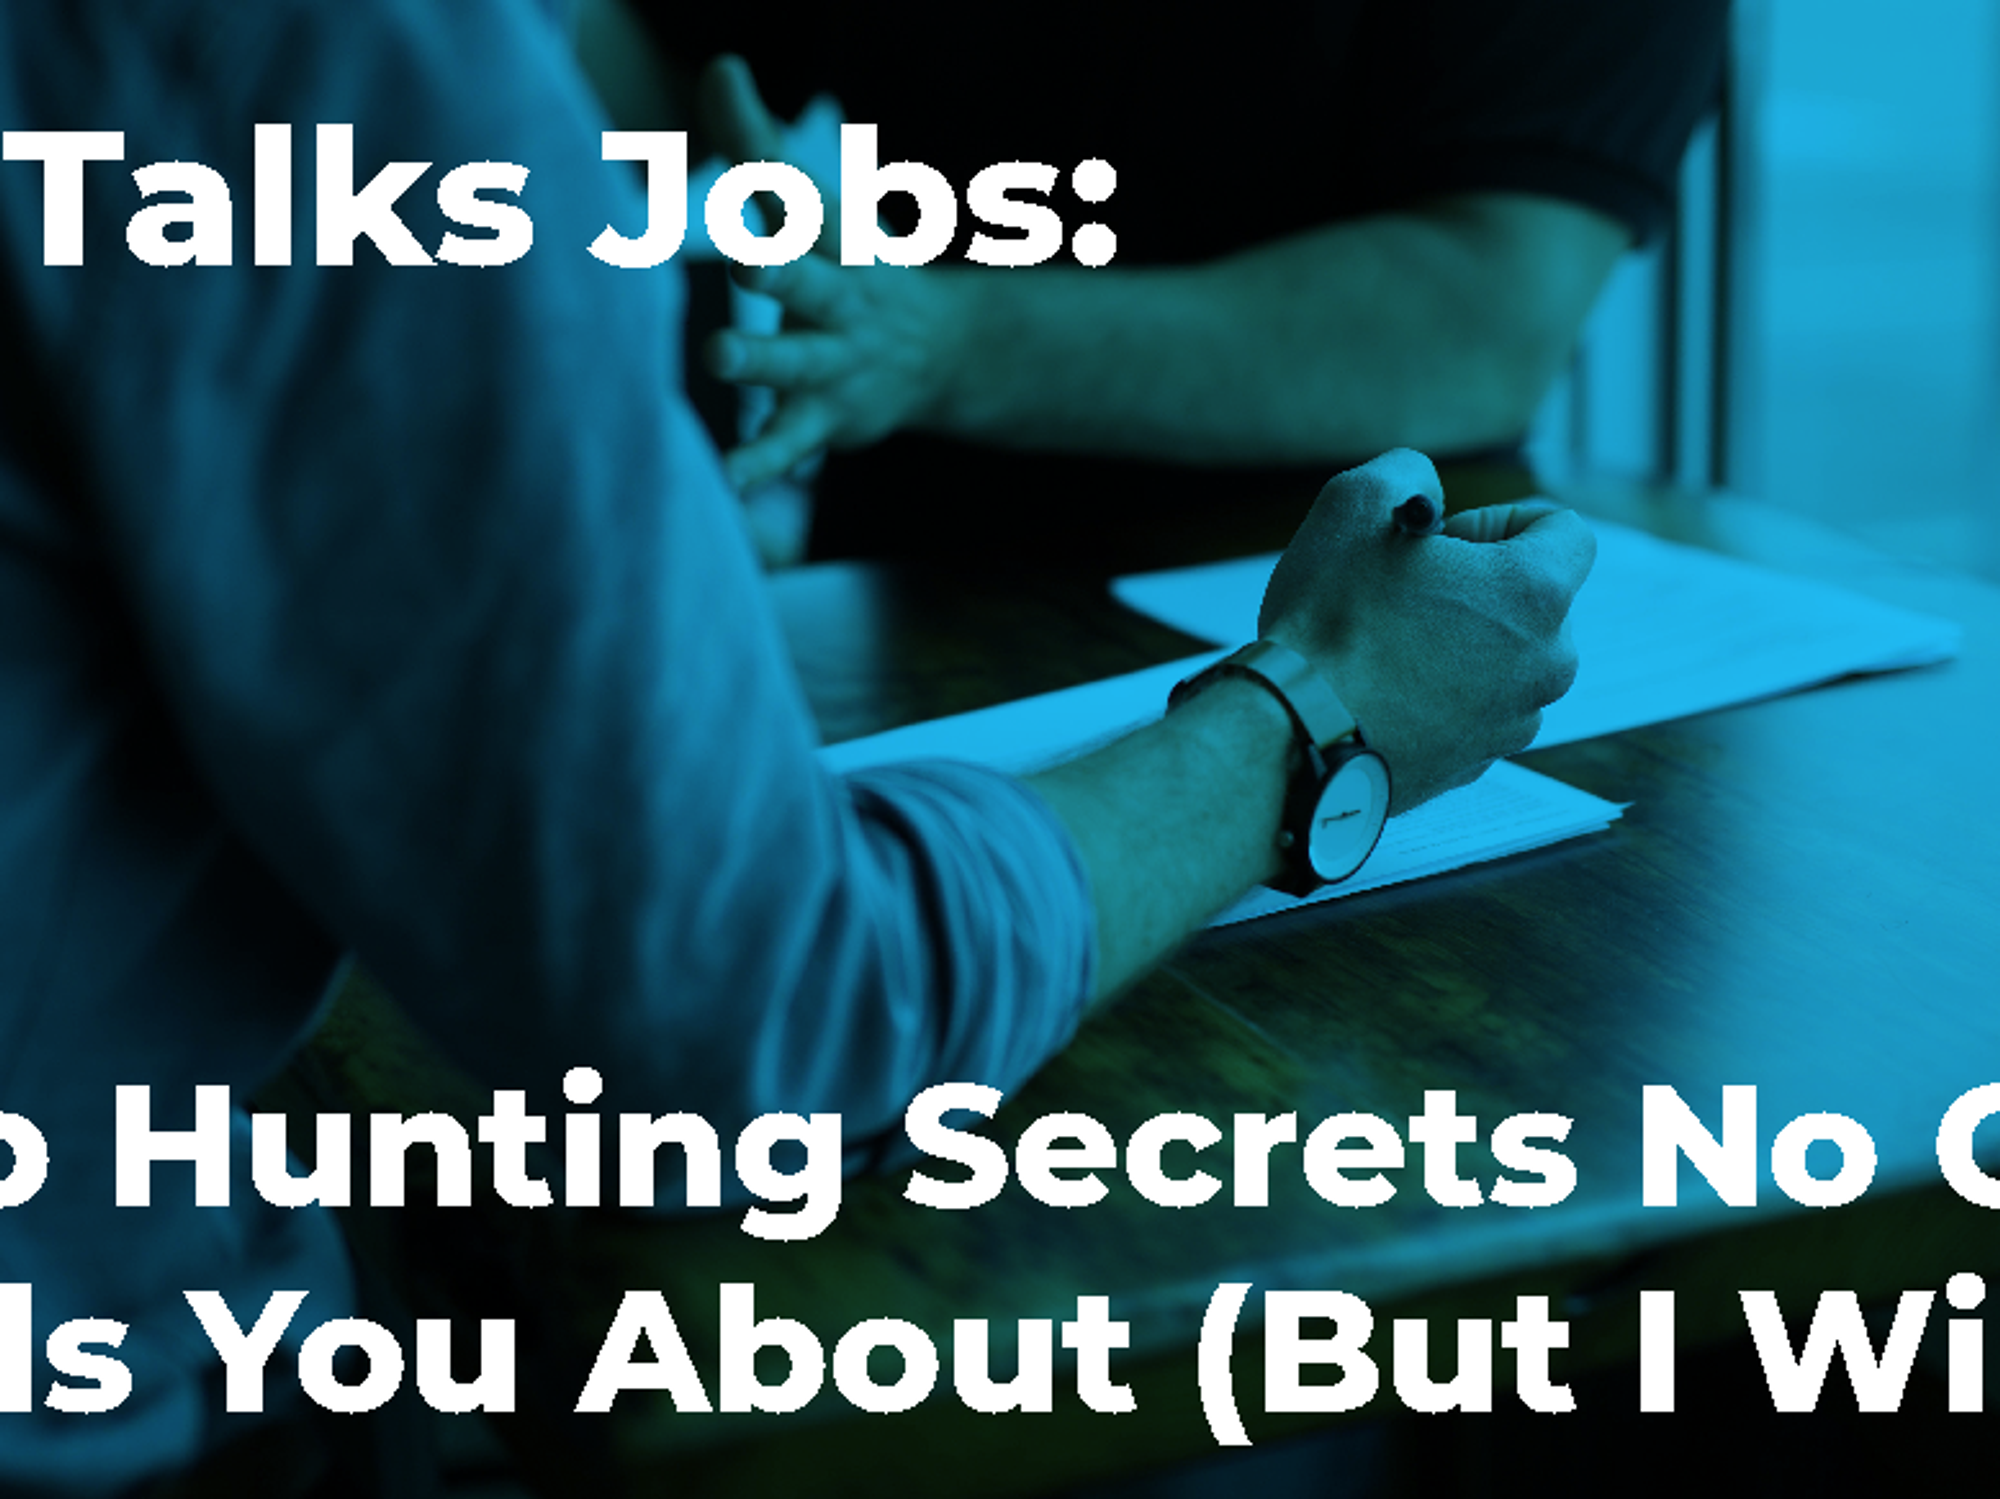 The Job Hunting Secrets No One Wants You To Know!